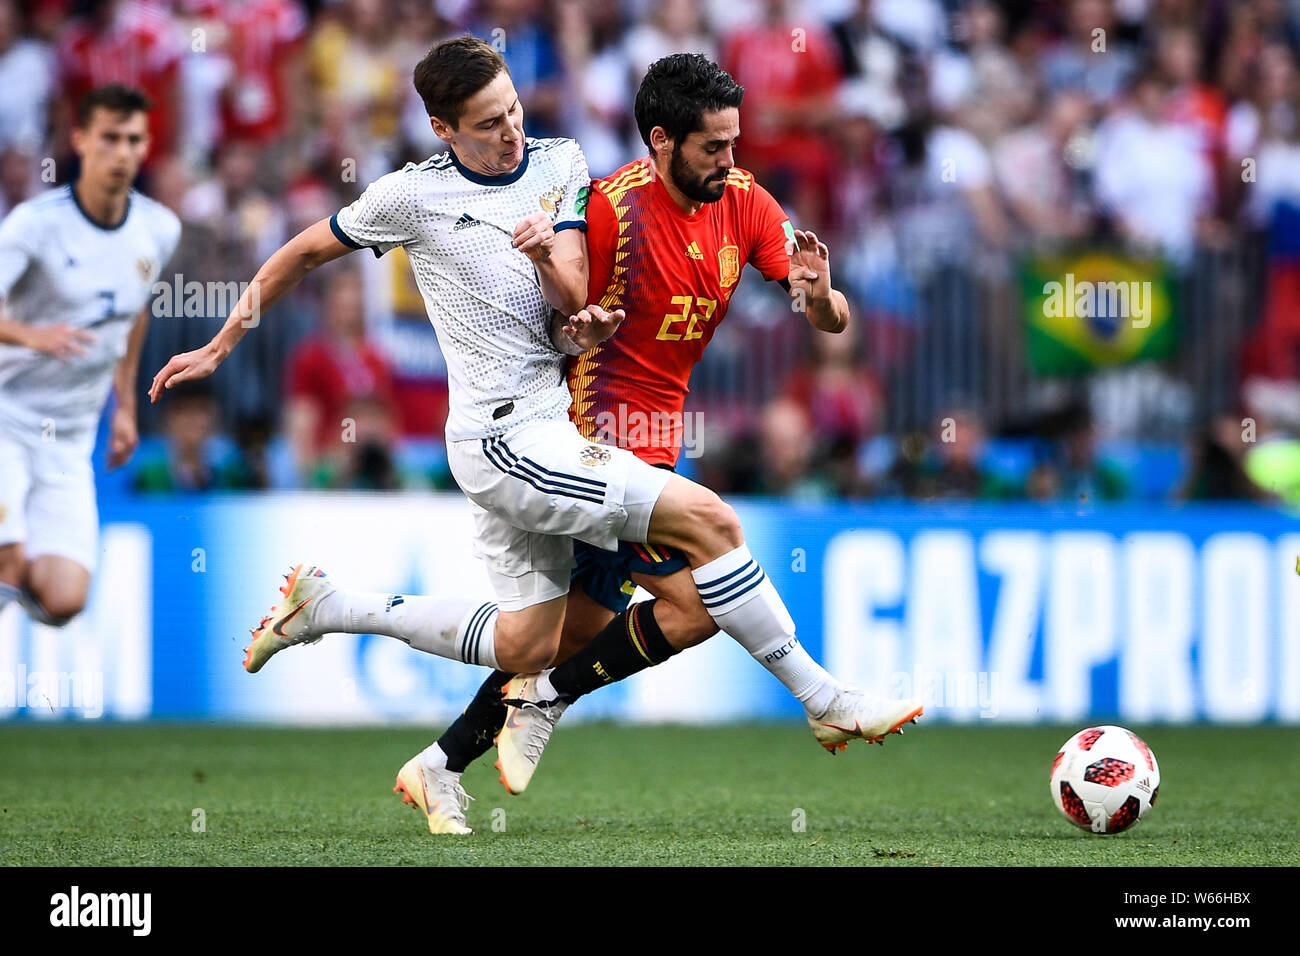 Daler Kuzyayev of Russia, left, challenges Isco of Spain in their Round of 16 match during the 2018 FIFA World Cup in Moscow, Russia, 1 July 2018.   R Stock Photo